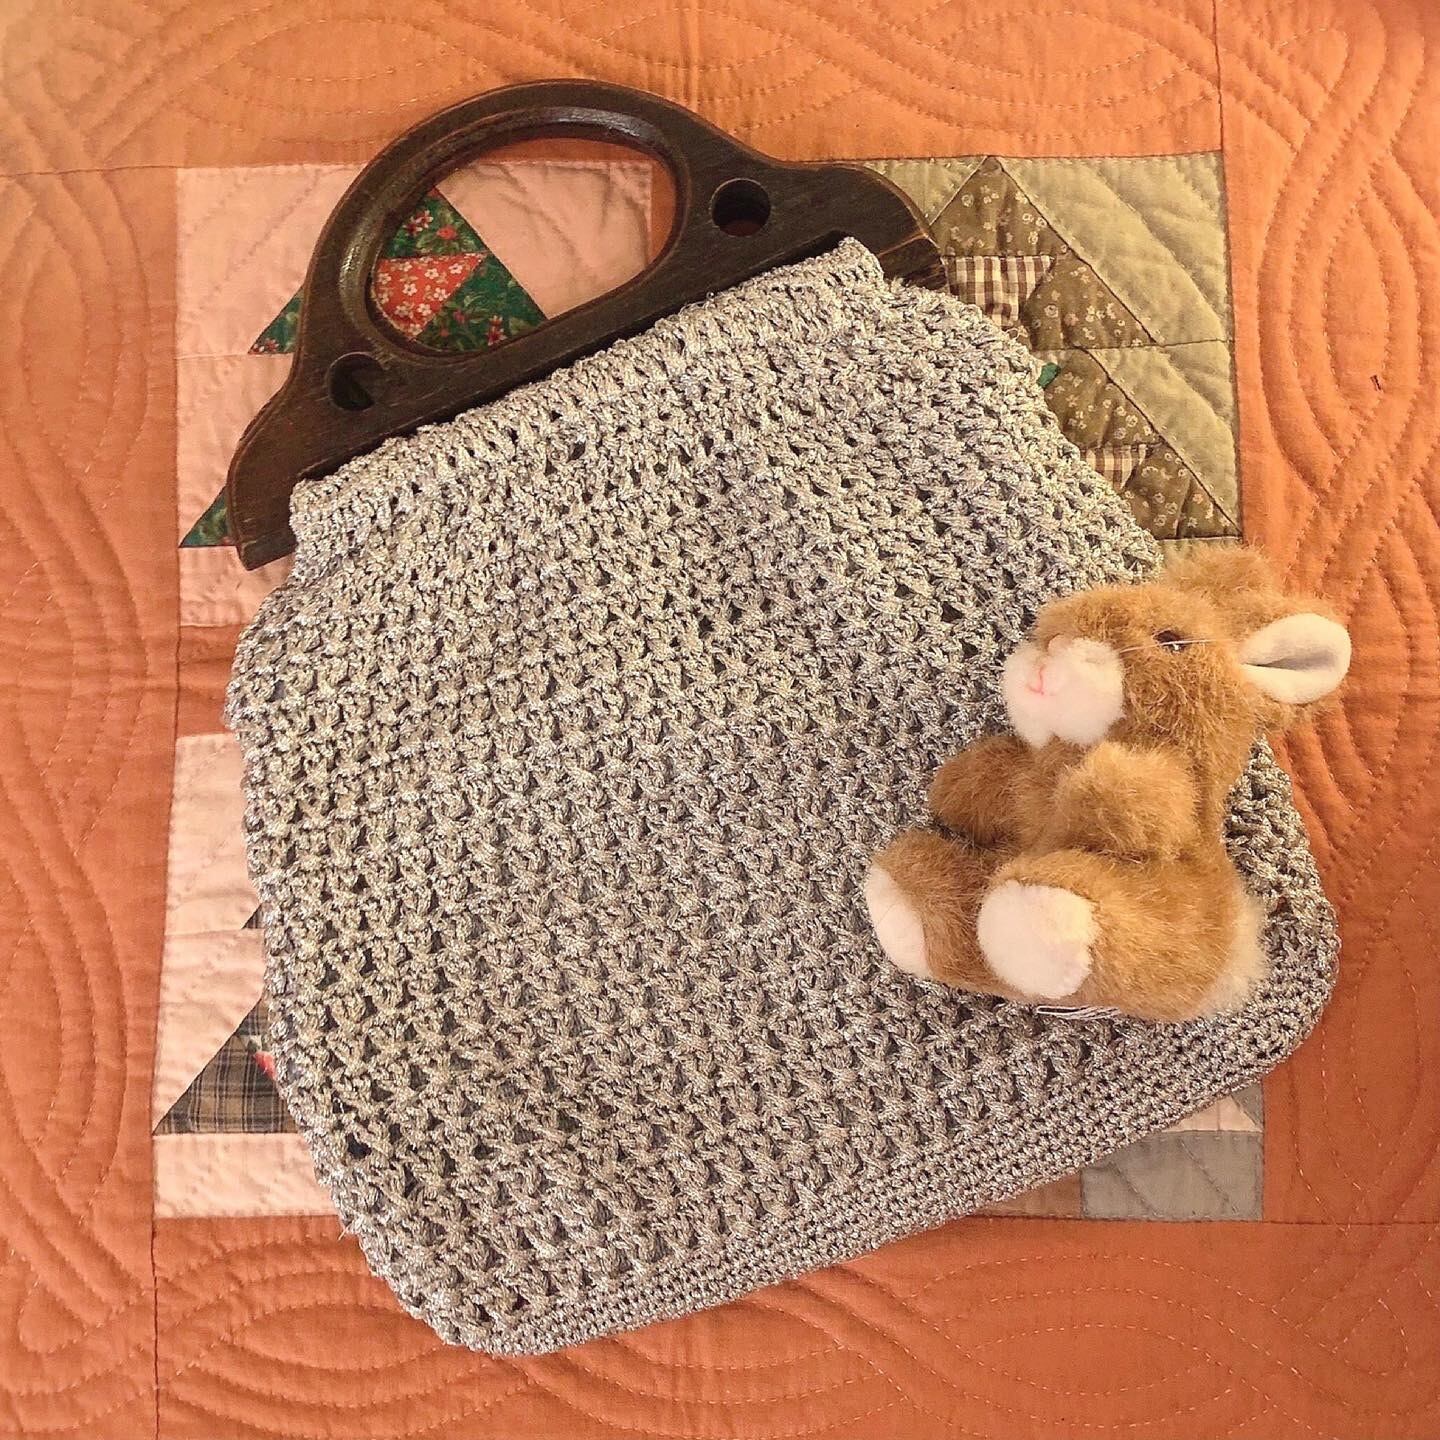 silver lame knit hand bag